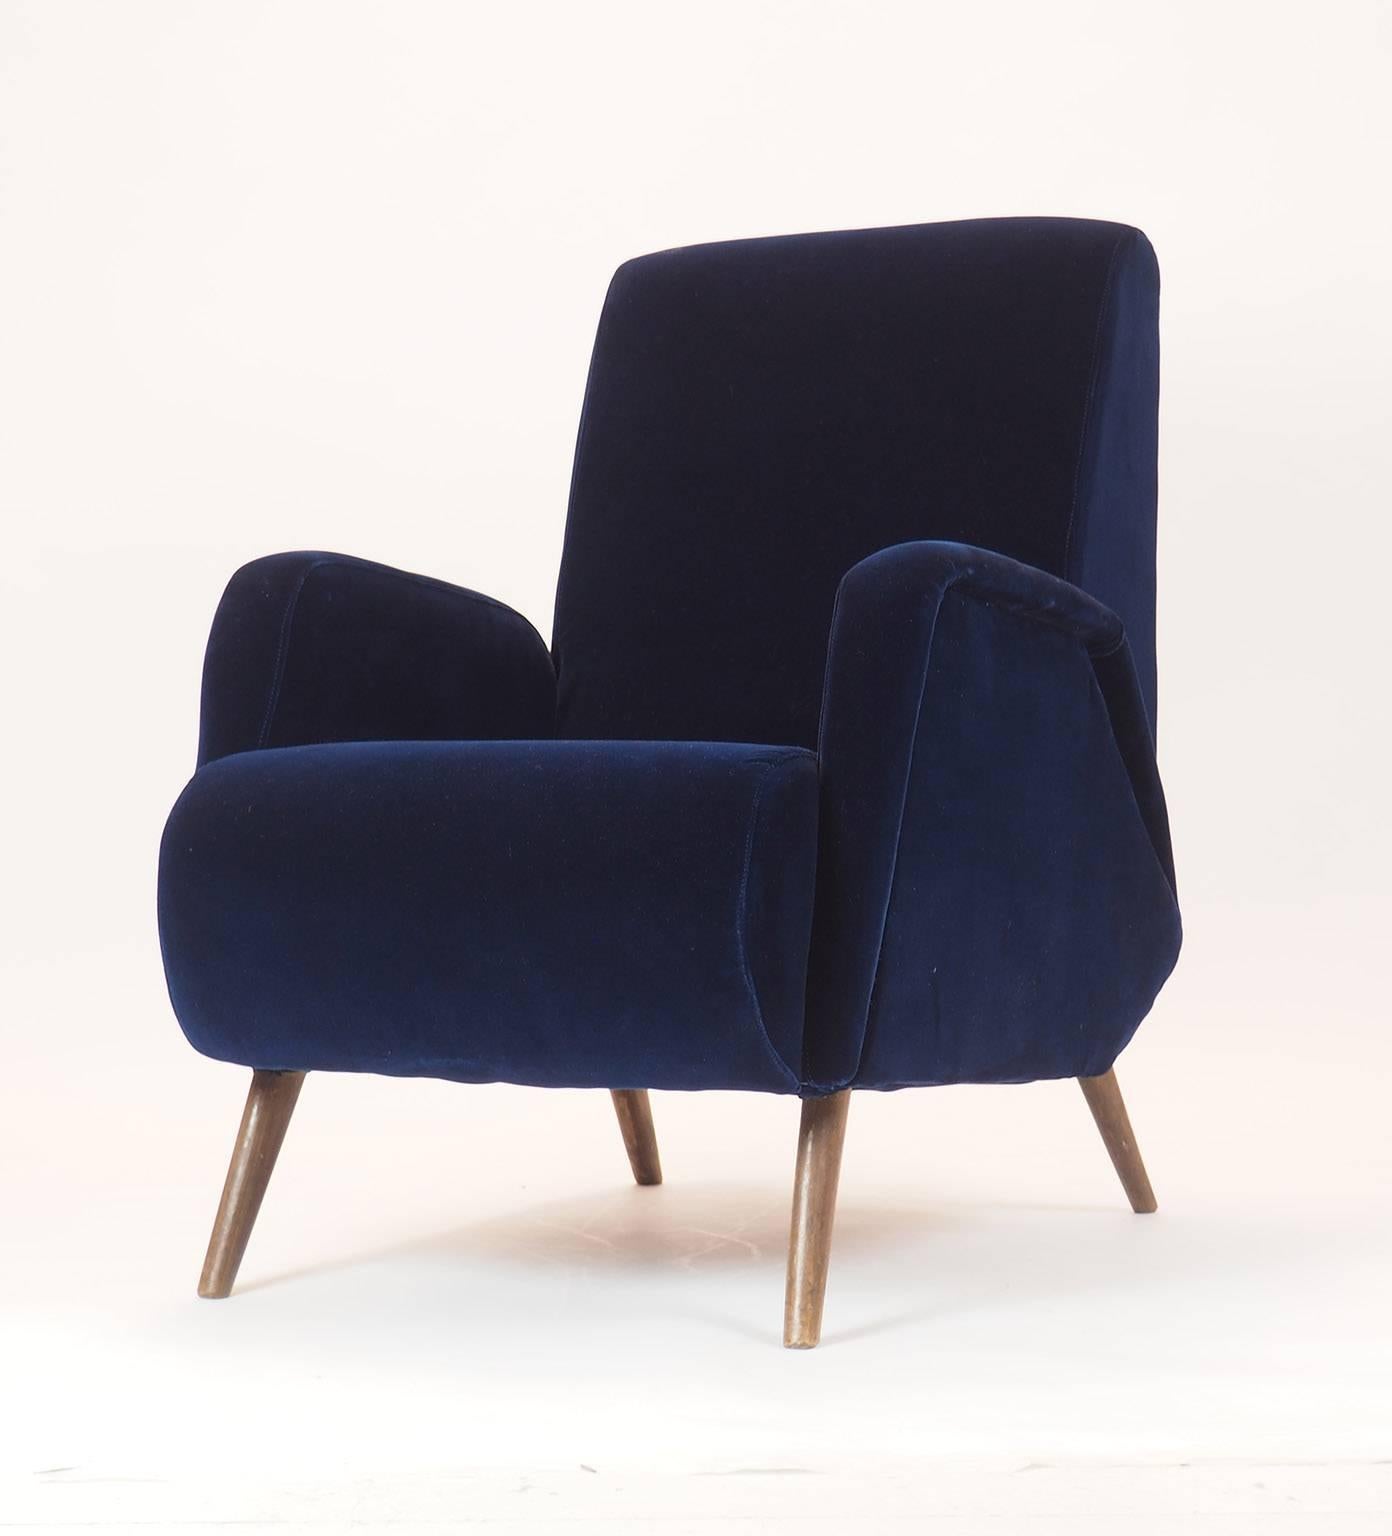 Mid-20th Century Pair of Blue Velvet Armchairs Manufactured by DASSI, Milano 1950s